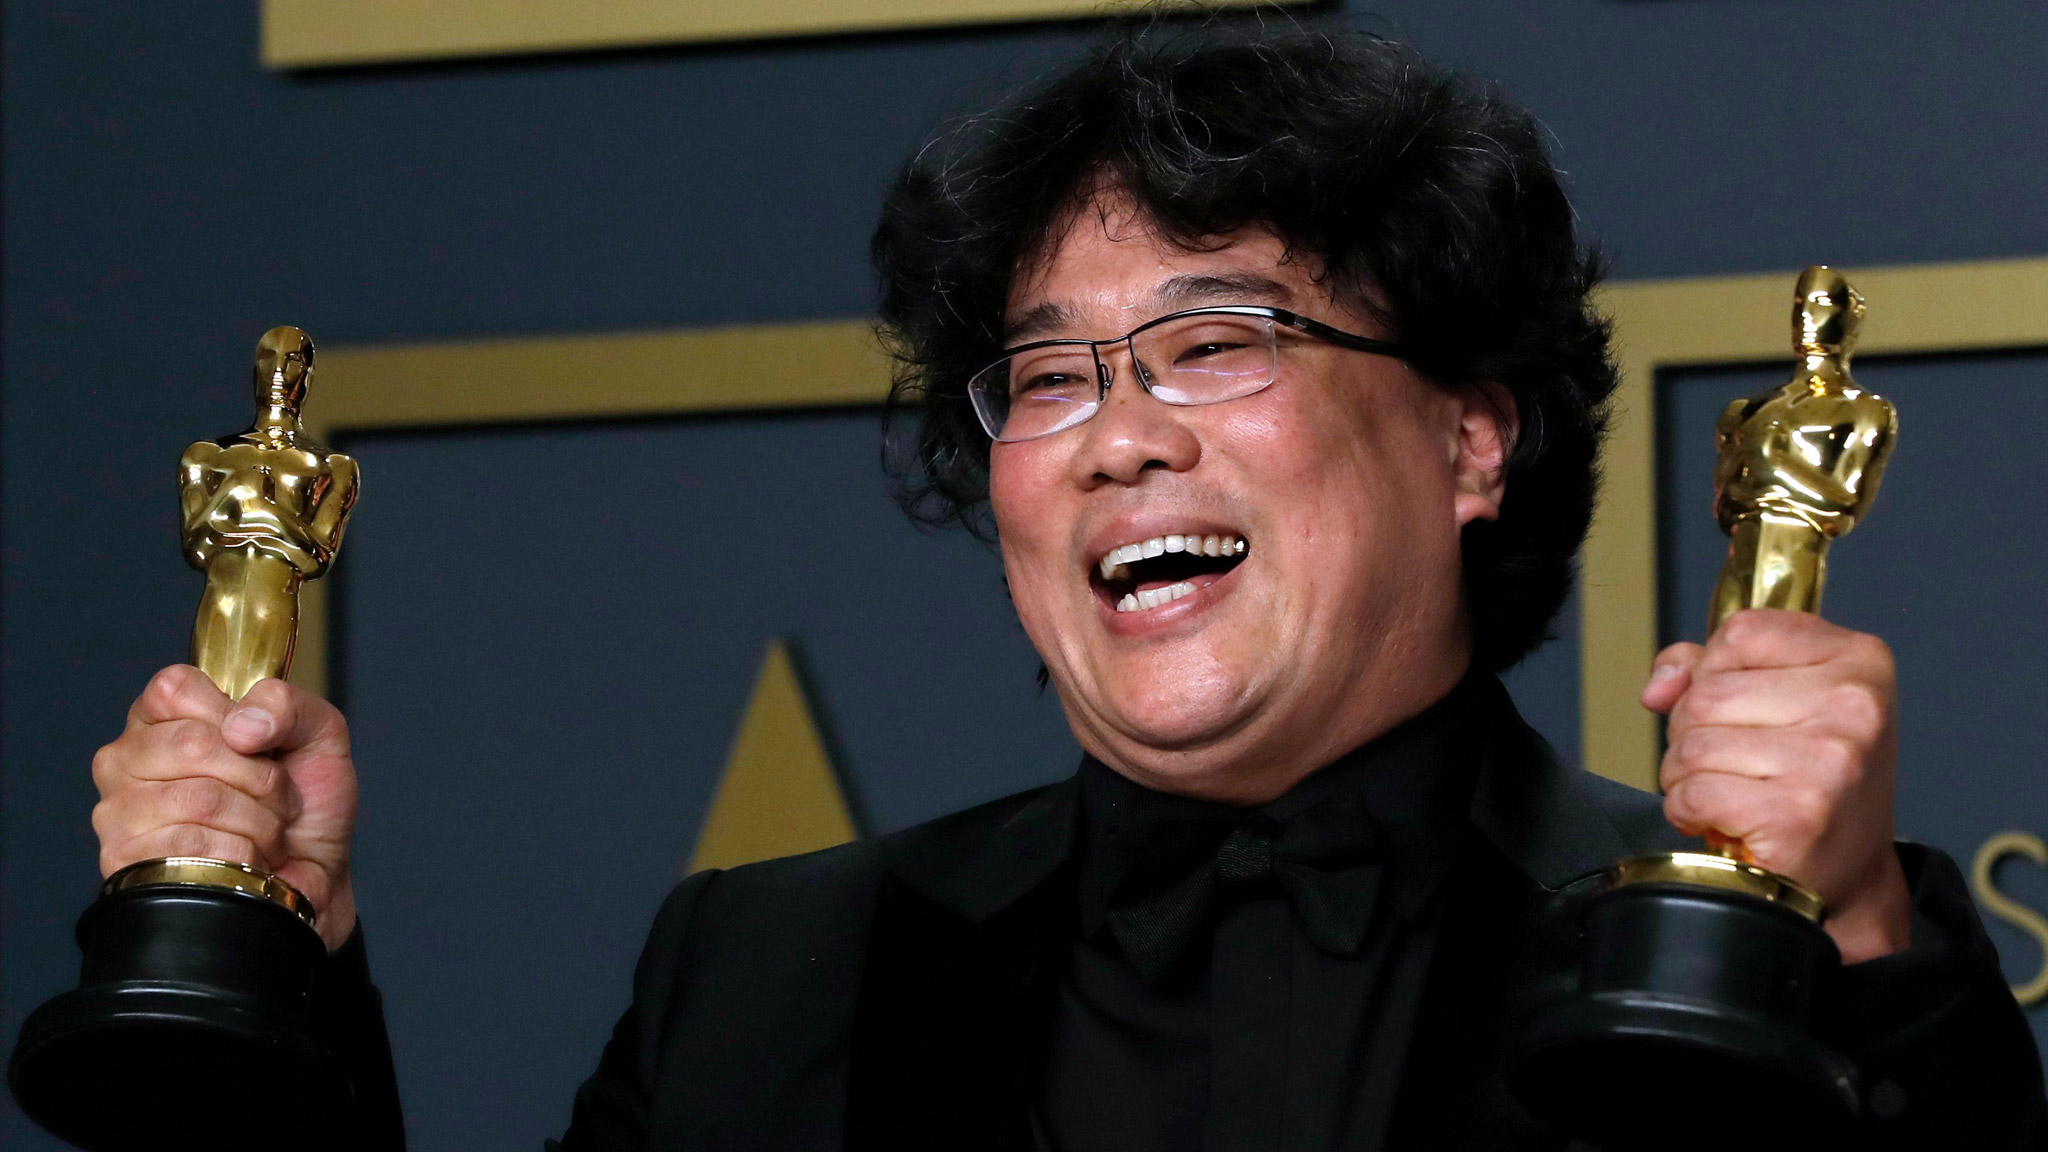 Oscars 2020: South Korea's Parasite makes history by winning best picture -  BBC News